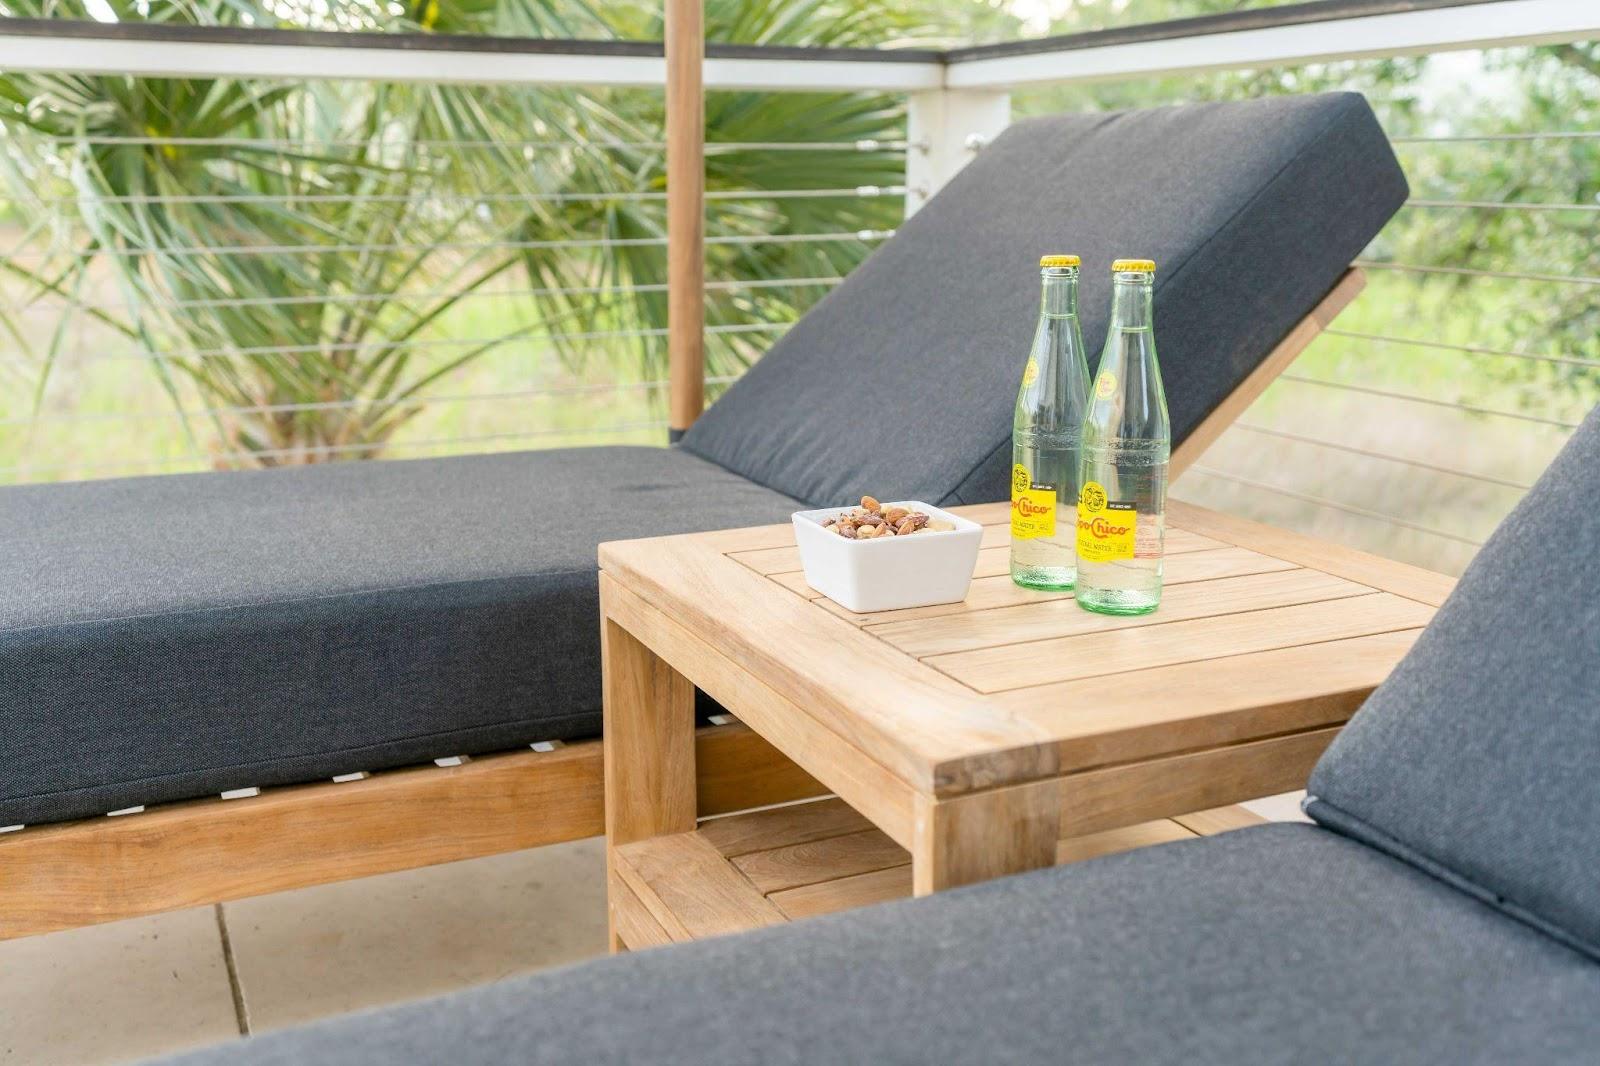 How to Clean Patio Furniture: The Ultimate Guide